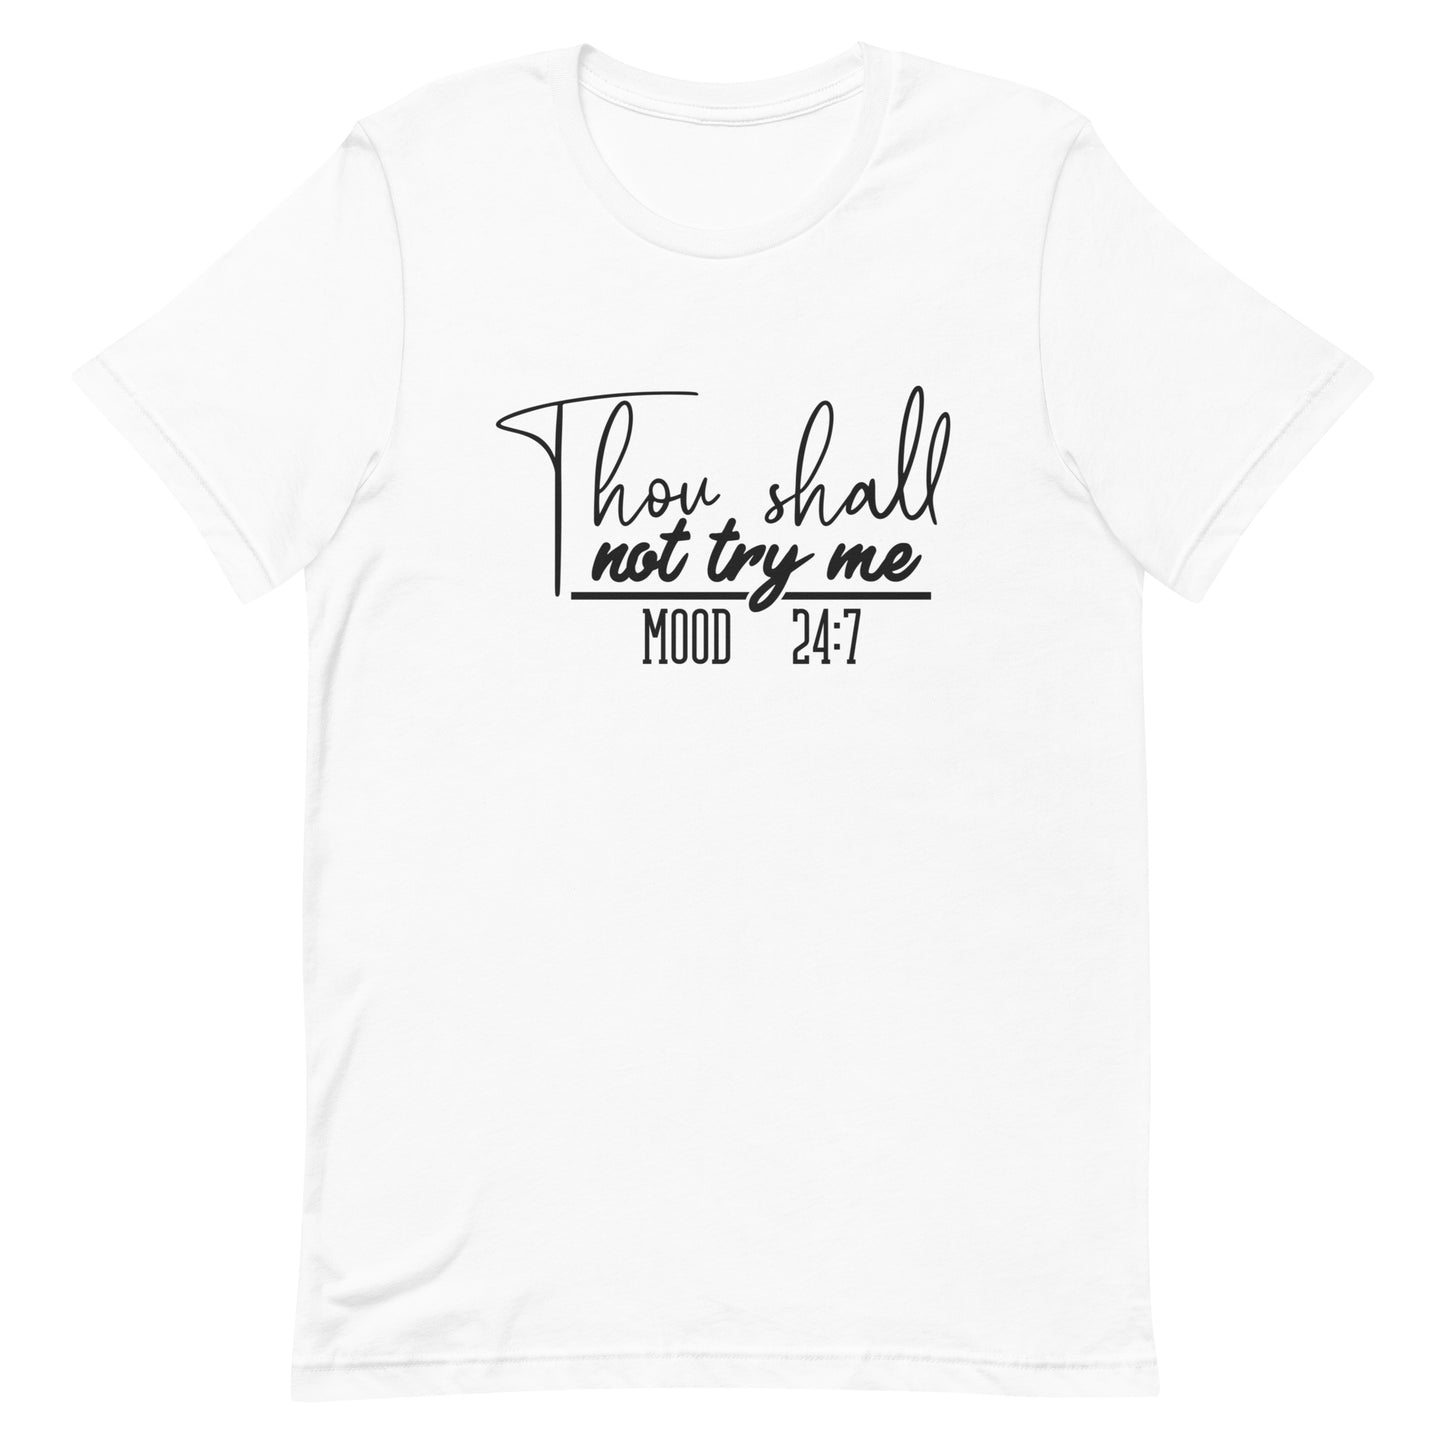 Thall Shall Not Try Me Mood 24:7 Unisex t-shirt